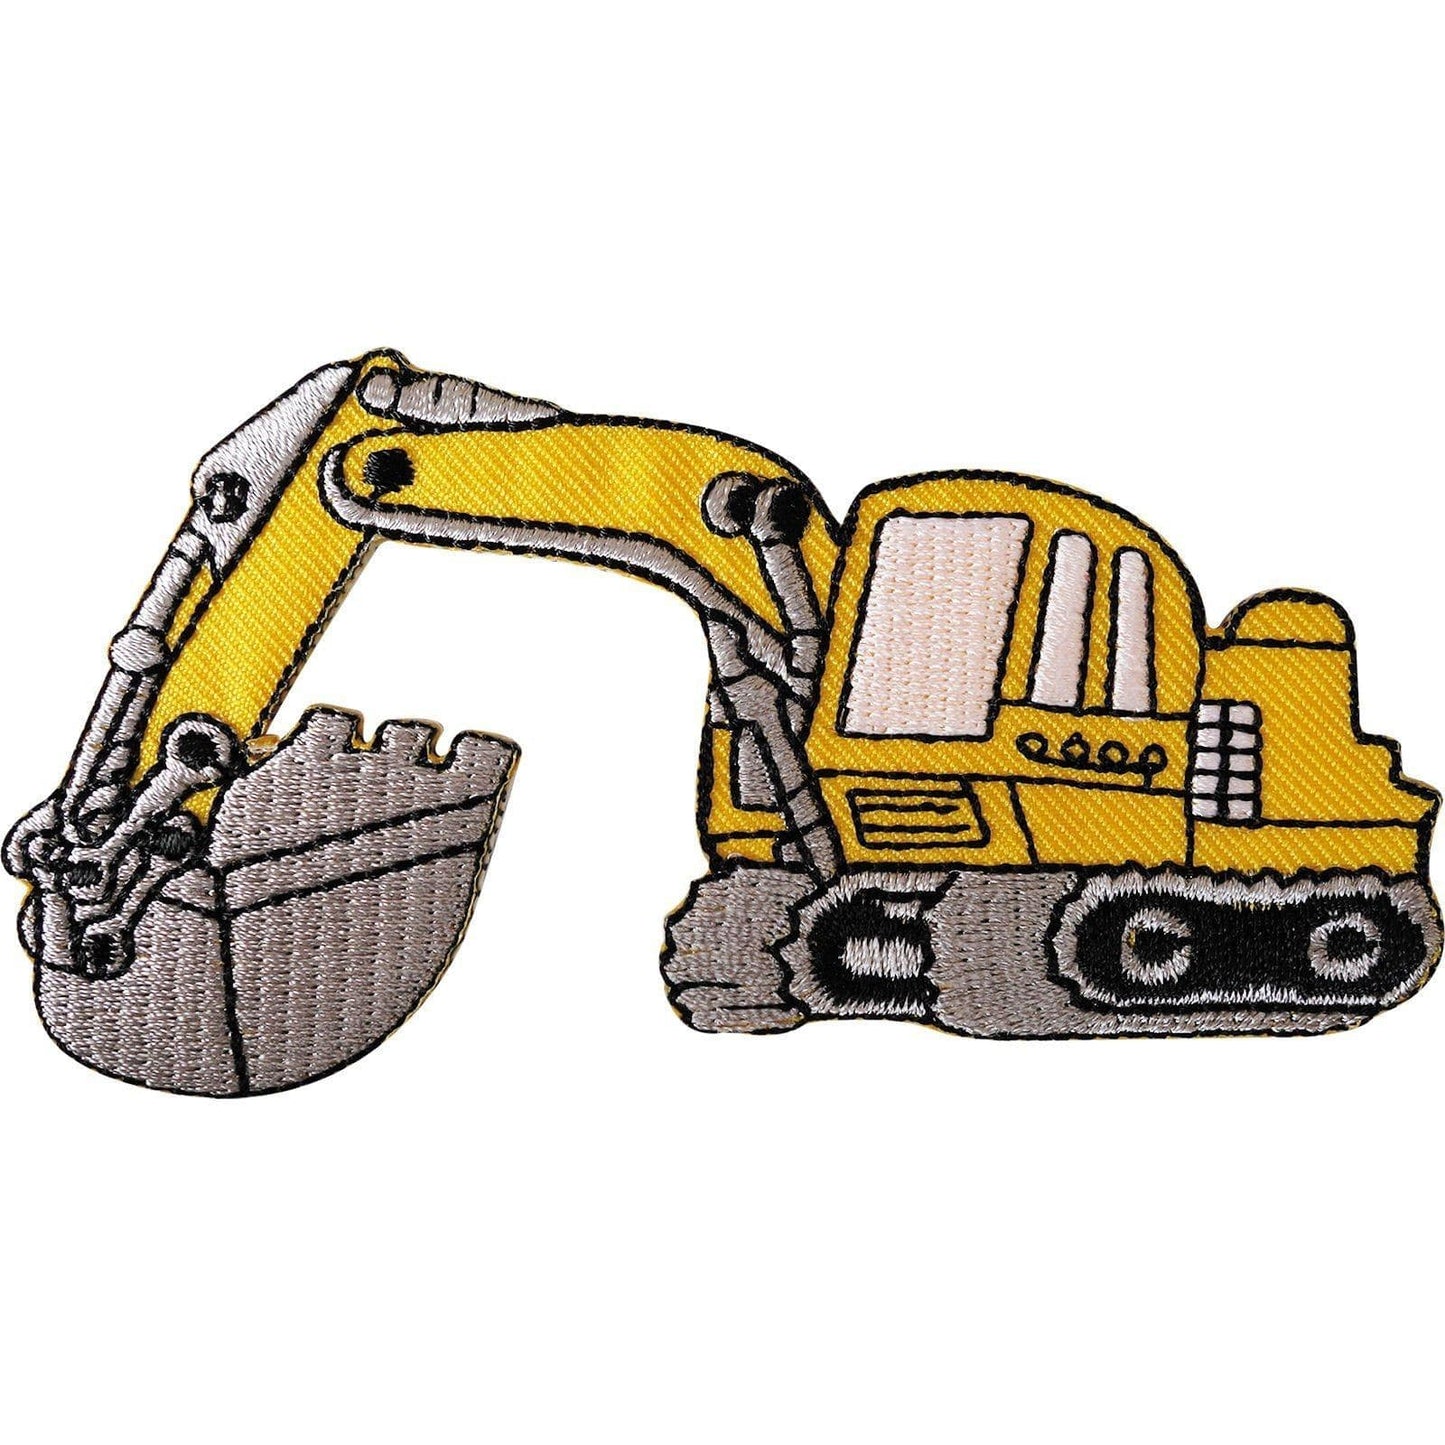 Bucket Digger Patch Iron Sew On Embroidered Builder Excavator Badge Kids Crafts